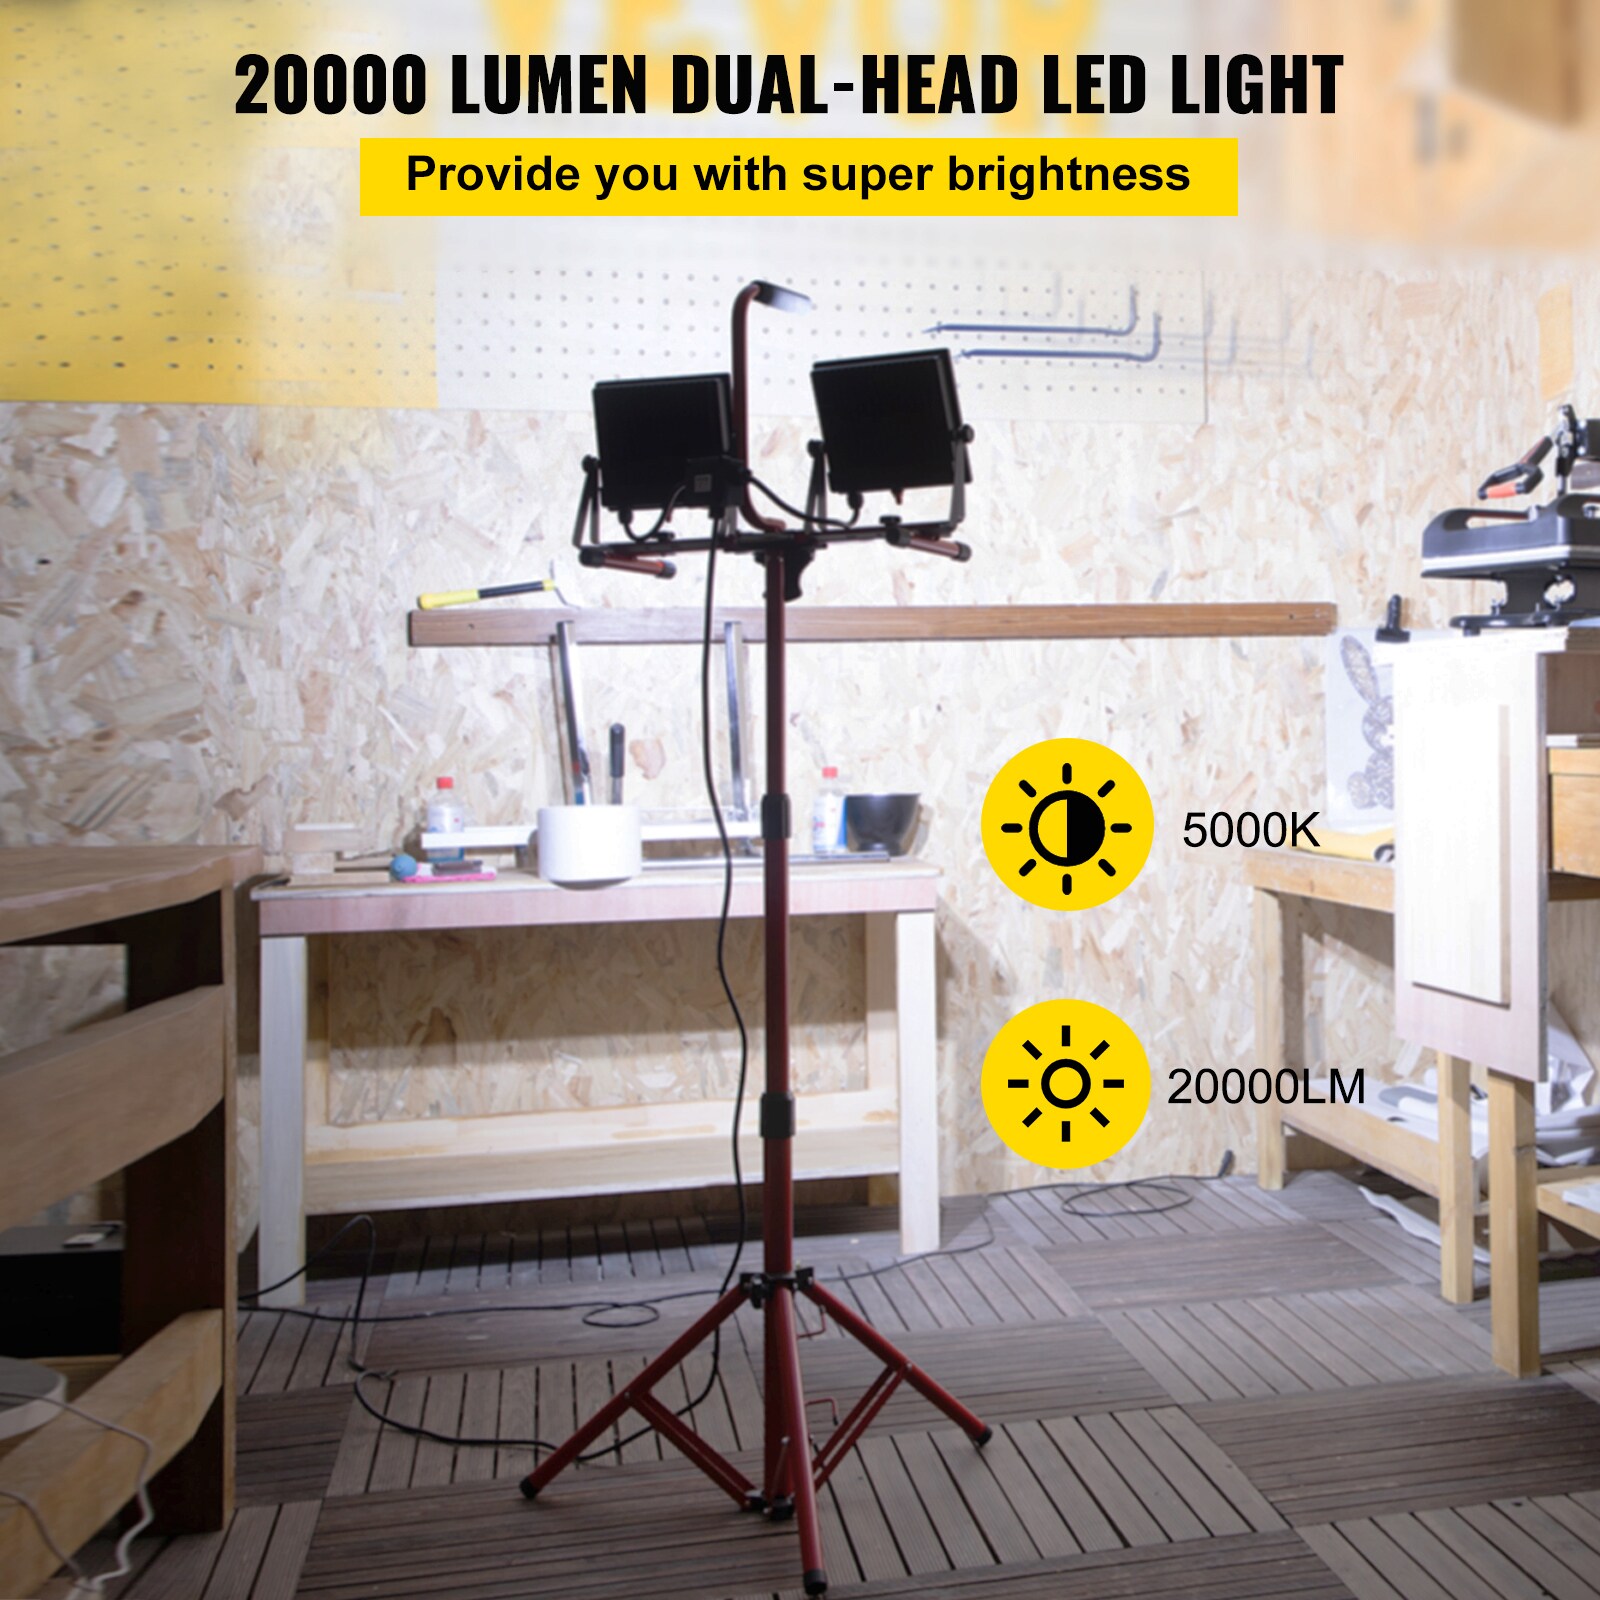 Dual Portable Work Lights with Stand